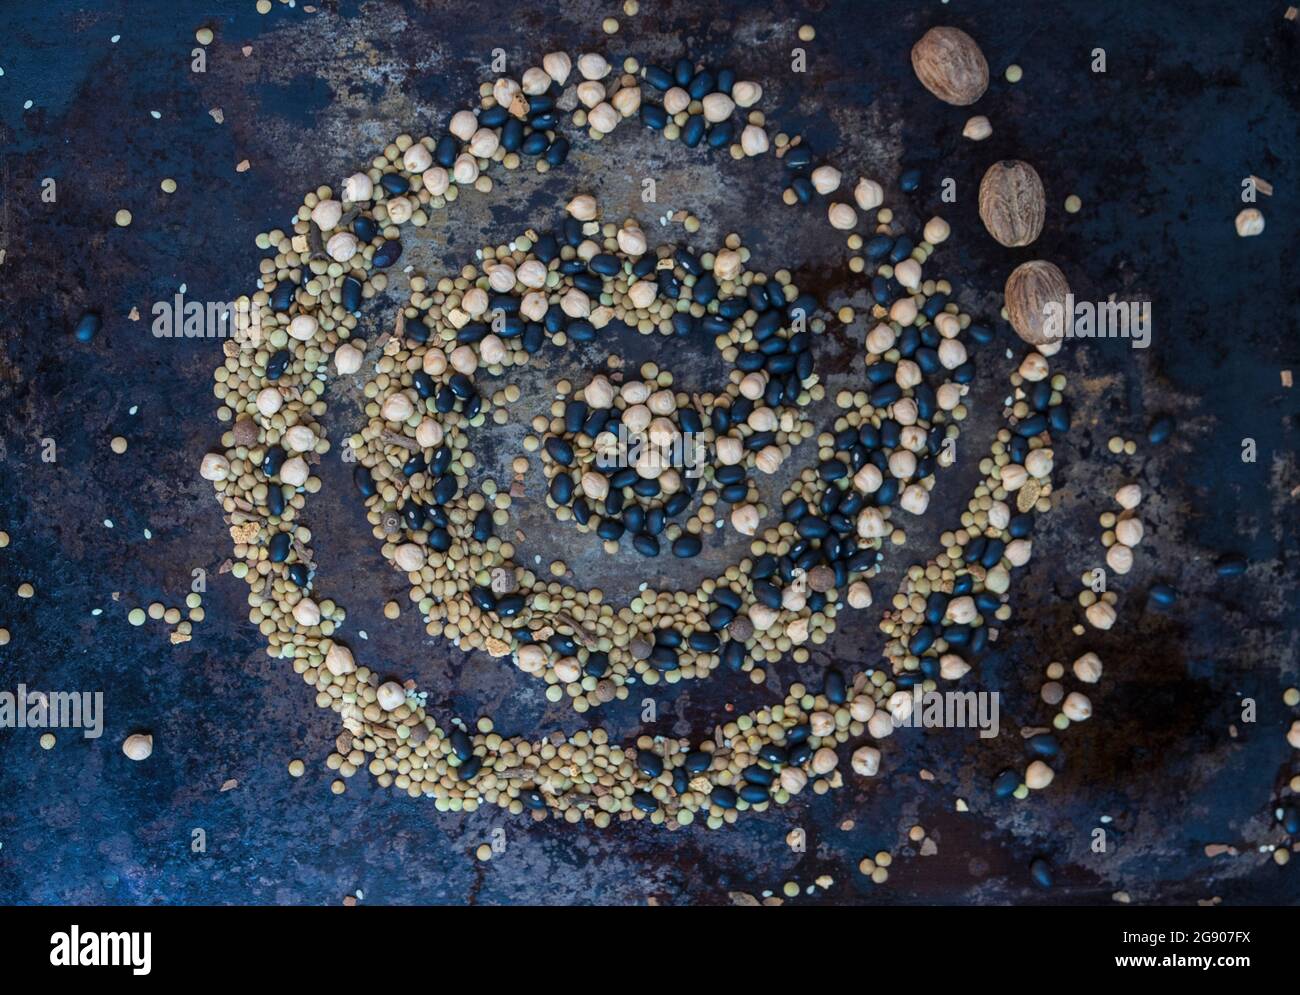 Spiral shape made of various spices and legumes Stock Photo